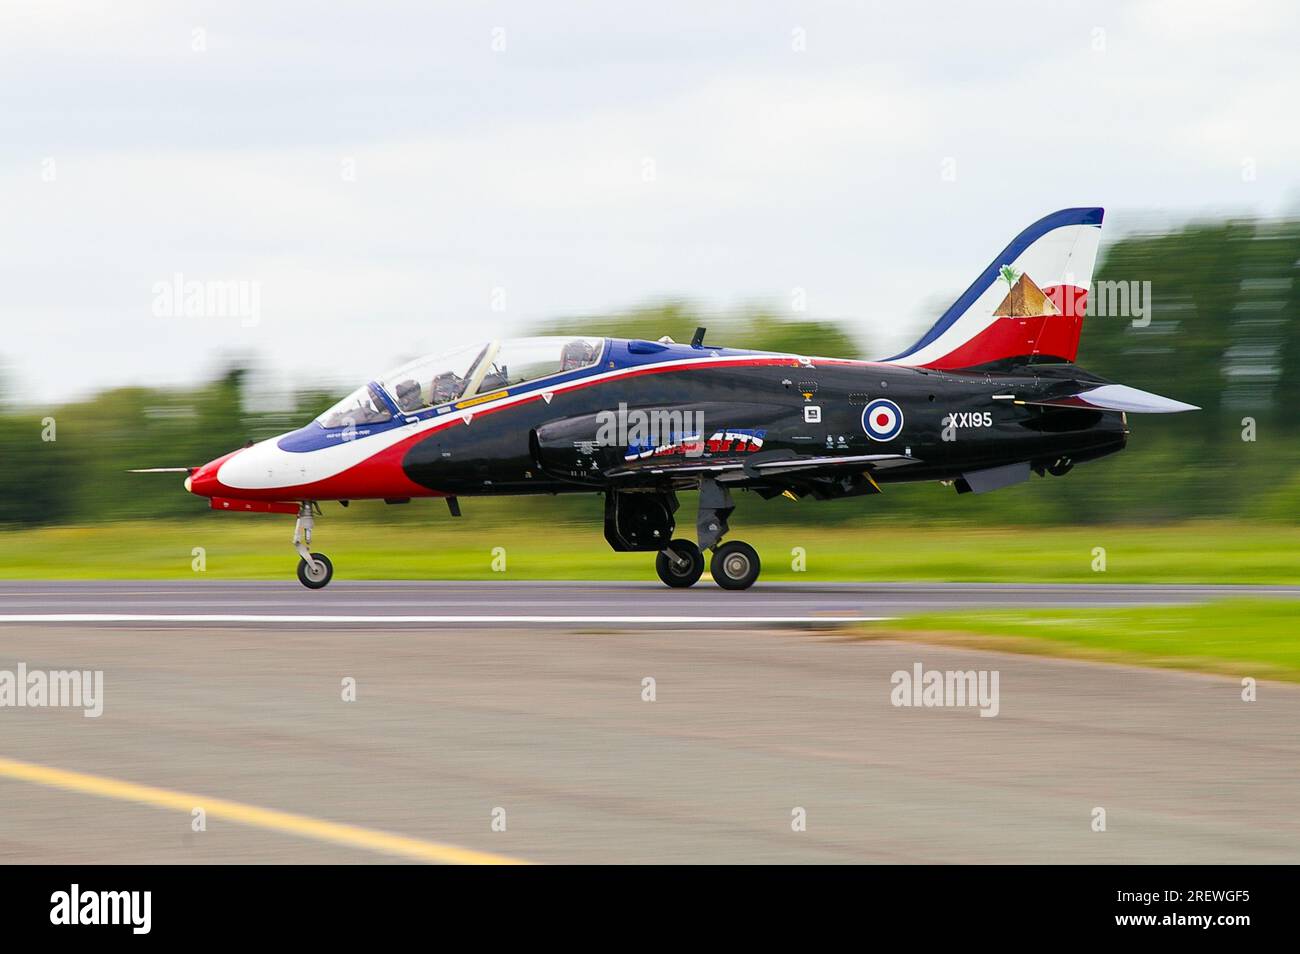 Royal Air Force display jet plane BAe Hawk T1 in special paint scheme celebrating 85 years of No. 4 Flying Training School RAF. Flown by Martin Pert Stock Photo